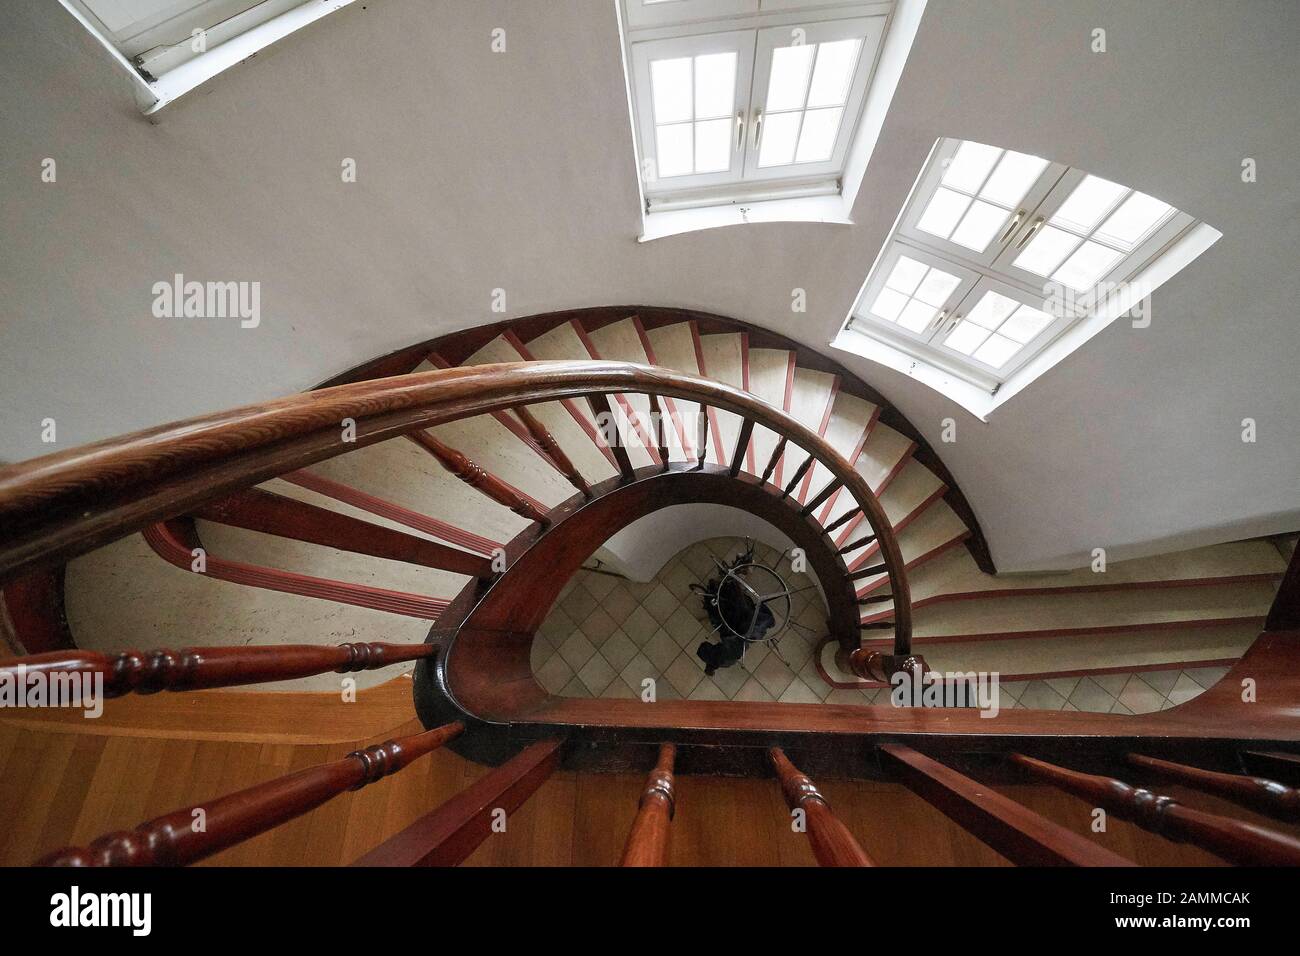 Staircase, 2017 will be a Thomas Mann Year in Bad Tölz. *6 June 1875 in Lübeck, † 12 August 1955 in Zurich, 'When I think of childhood, I think of Bad Tölz', Klaus Mann wrote in his book 'Kind dieser Zeit', exactly one hundred years ago the family gave up their 'manor house', as they lovingly called it, 'Don't walk on the edge of the lawn! - The Mann family and their country house in Bad Tölz 1908-1917' by Daniel Lang, 06.02.2017 [automated translation] Stock Photo